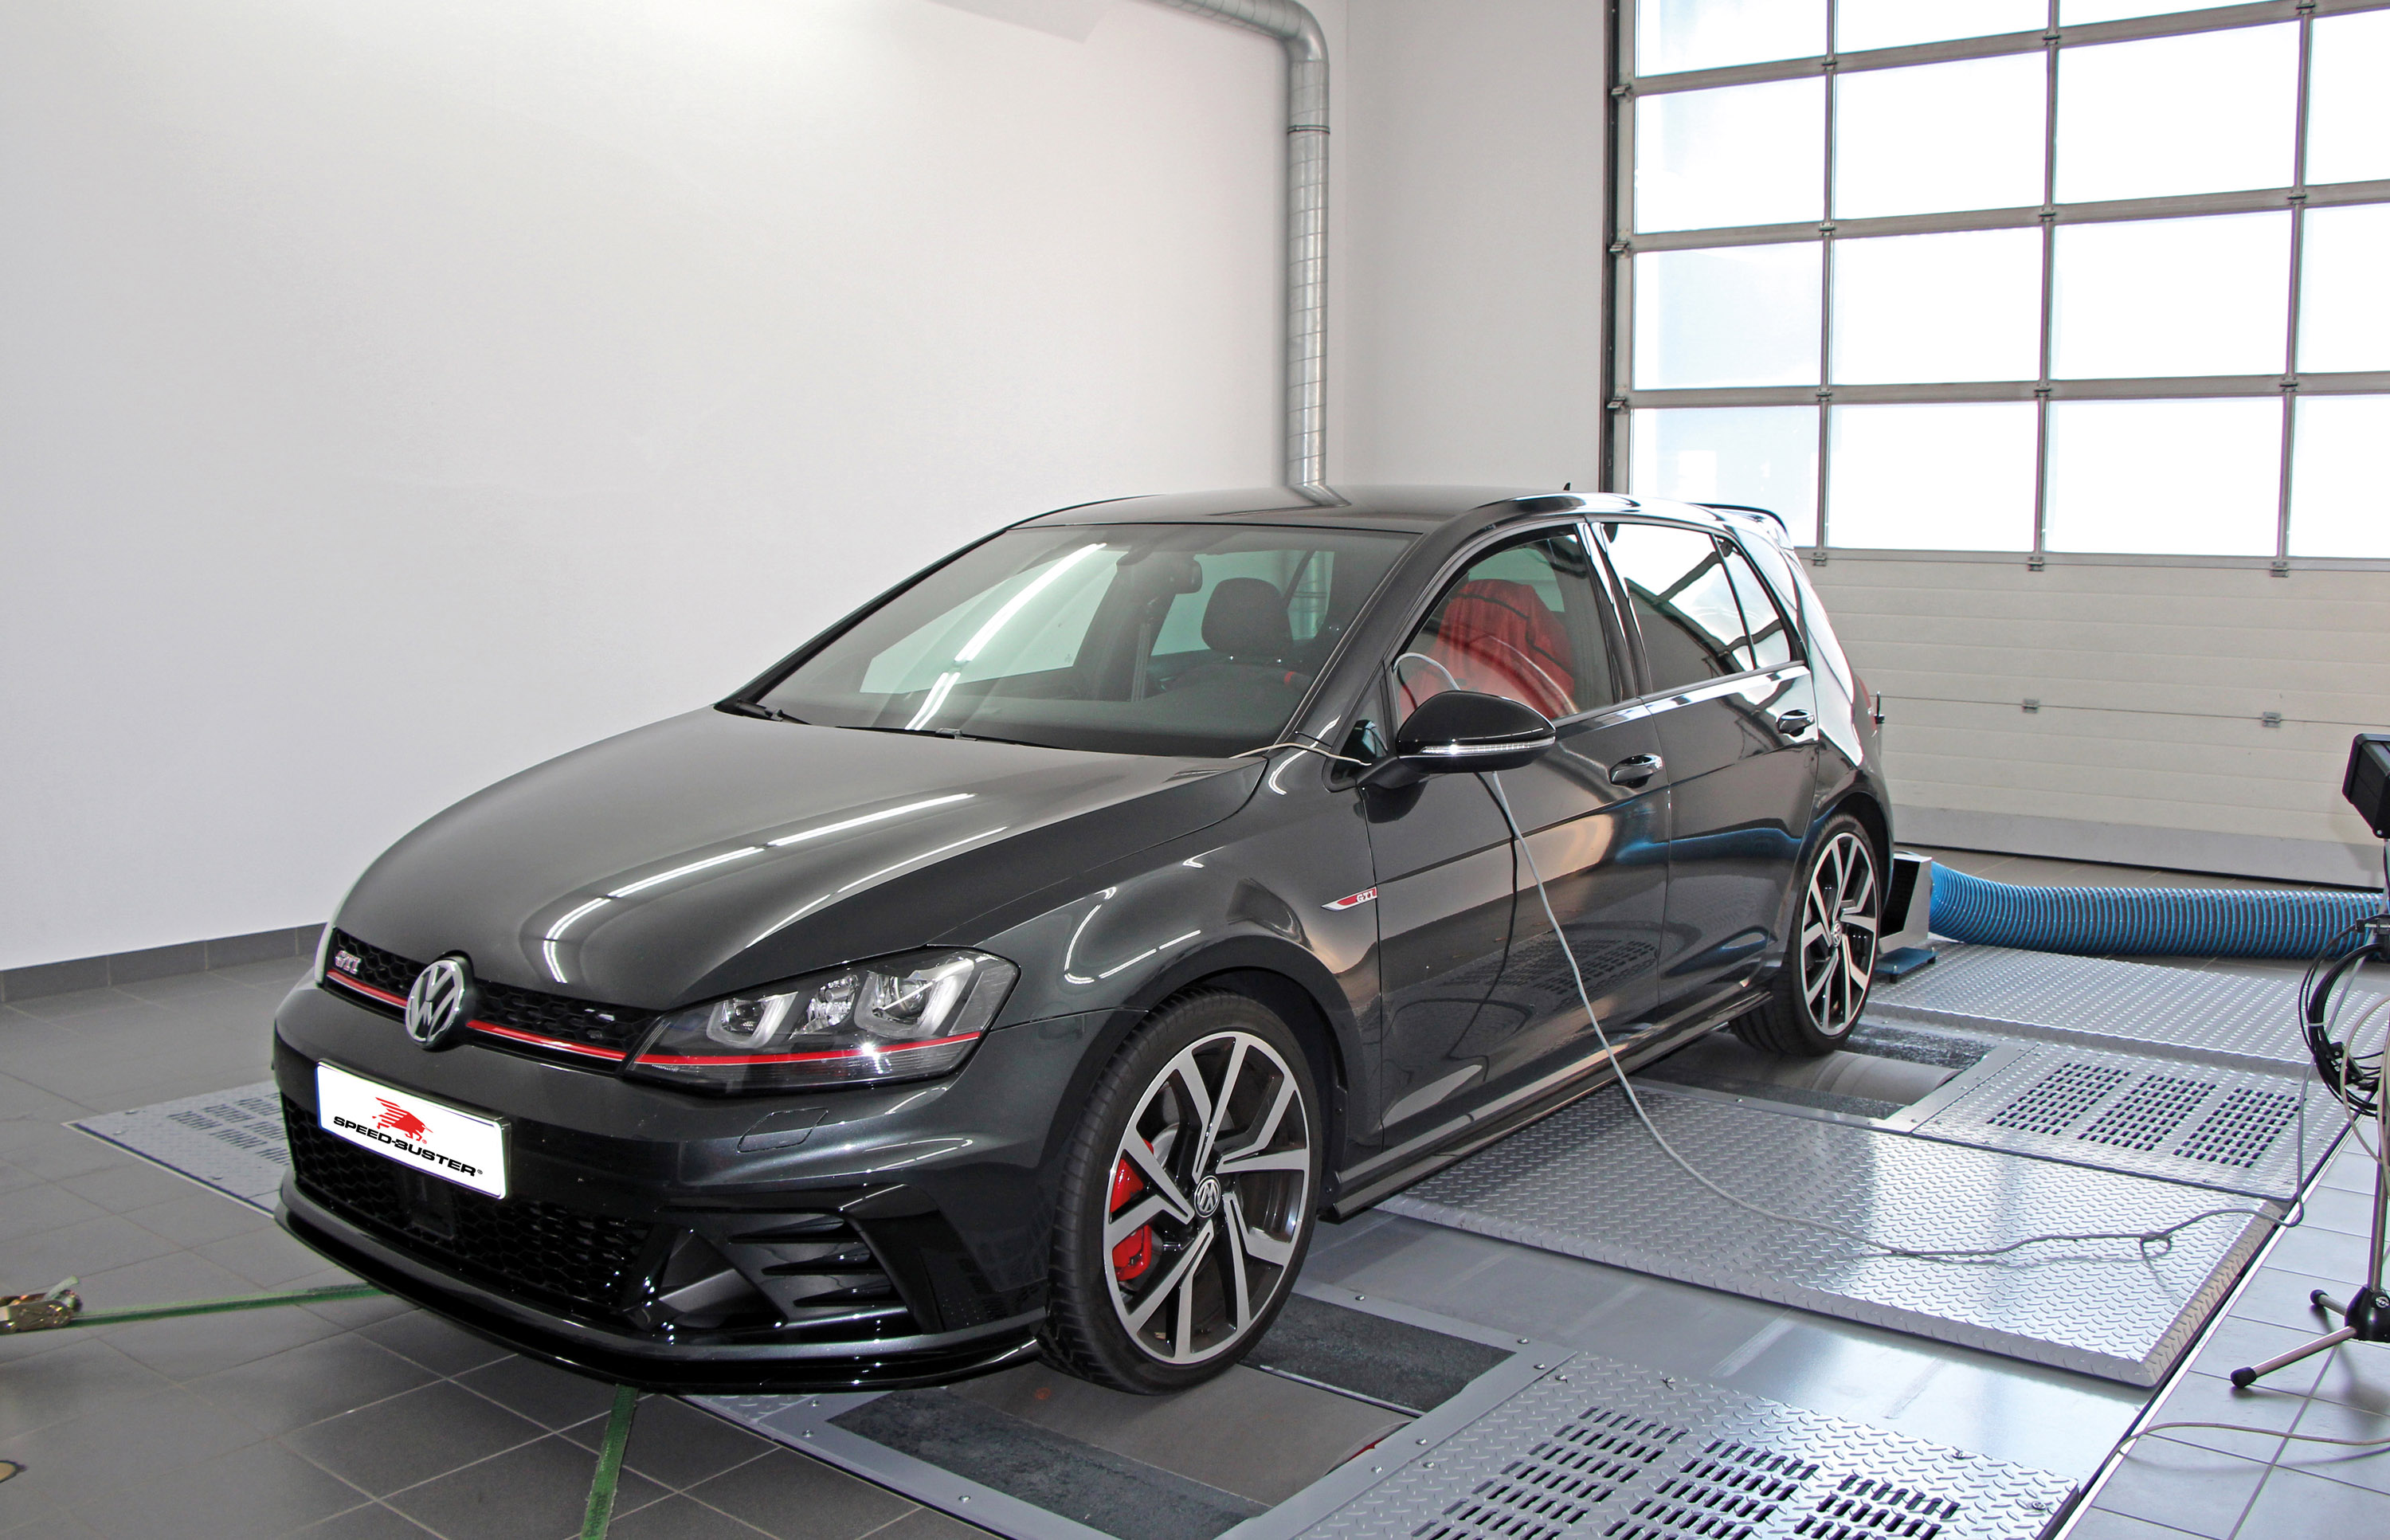 SPEED-BUSTER Volkswagen Golf GTI Clubsport S Limited Edition